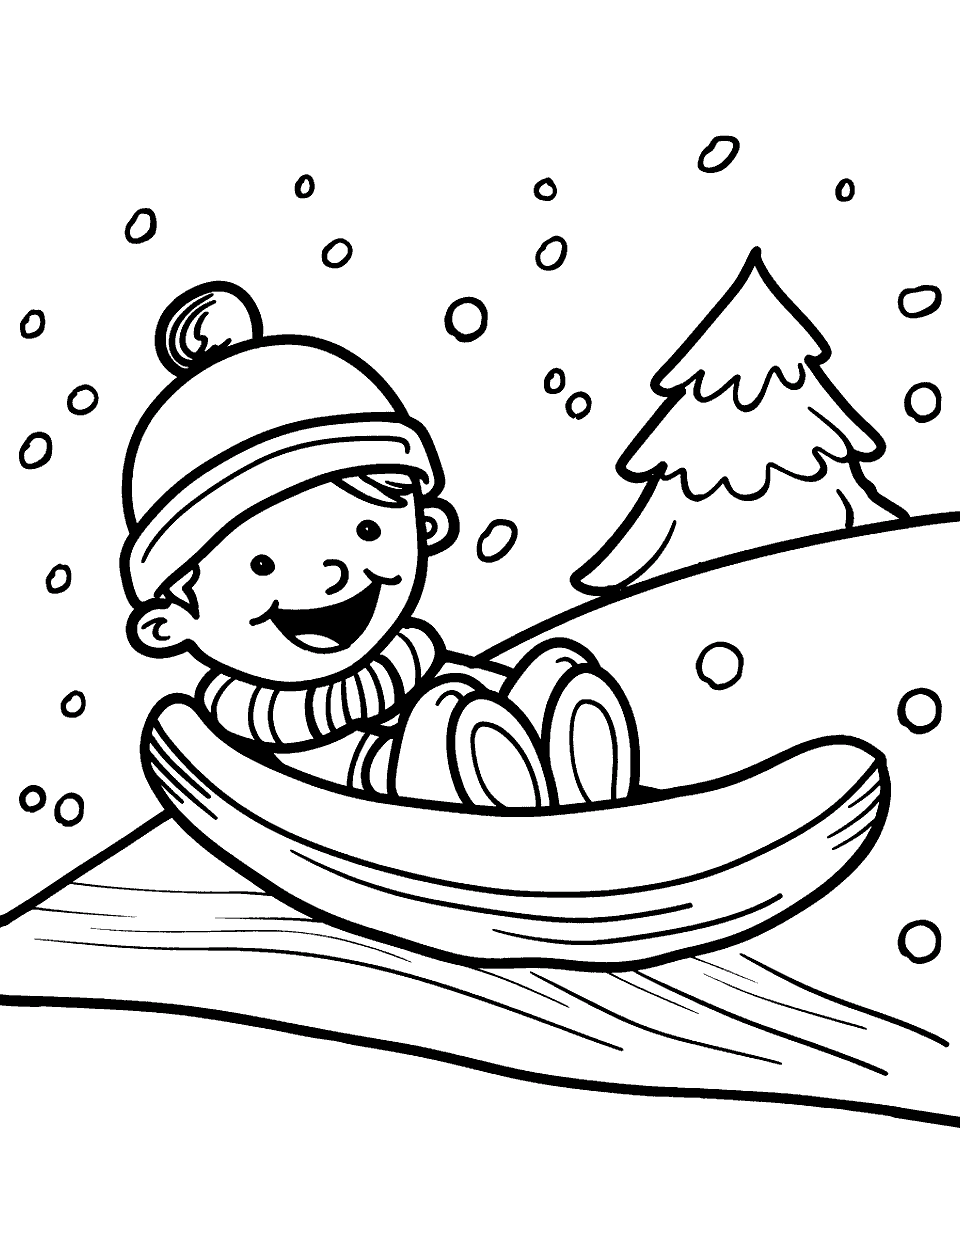 Winter Wonderland Coloring Page - A kid sledding down a small hill.